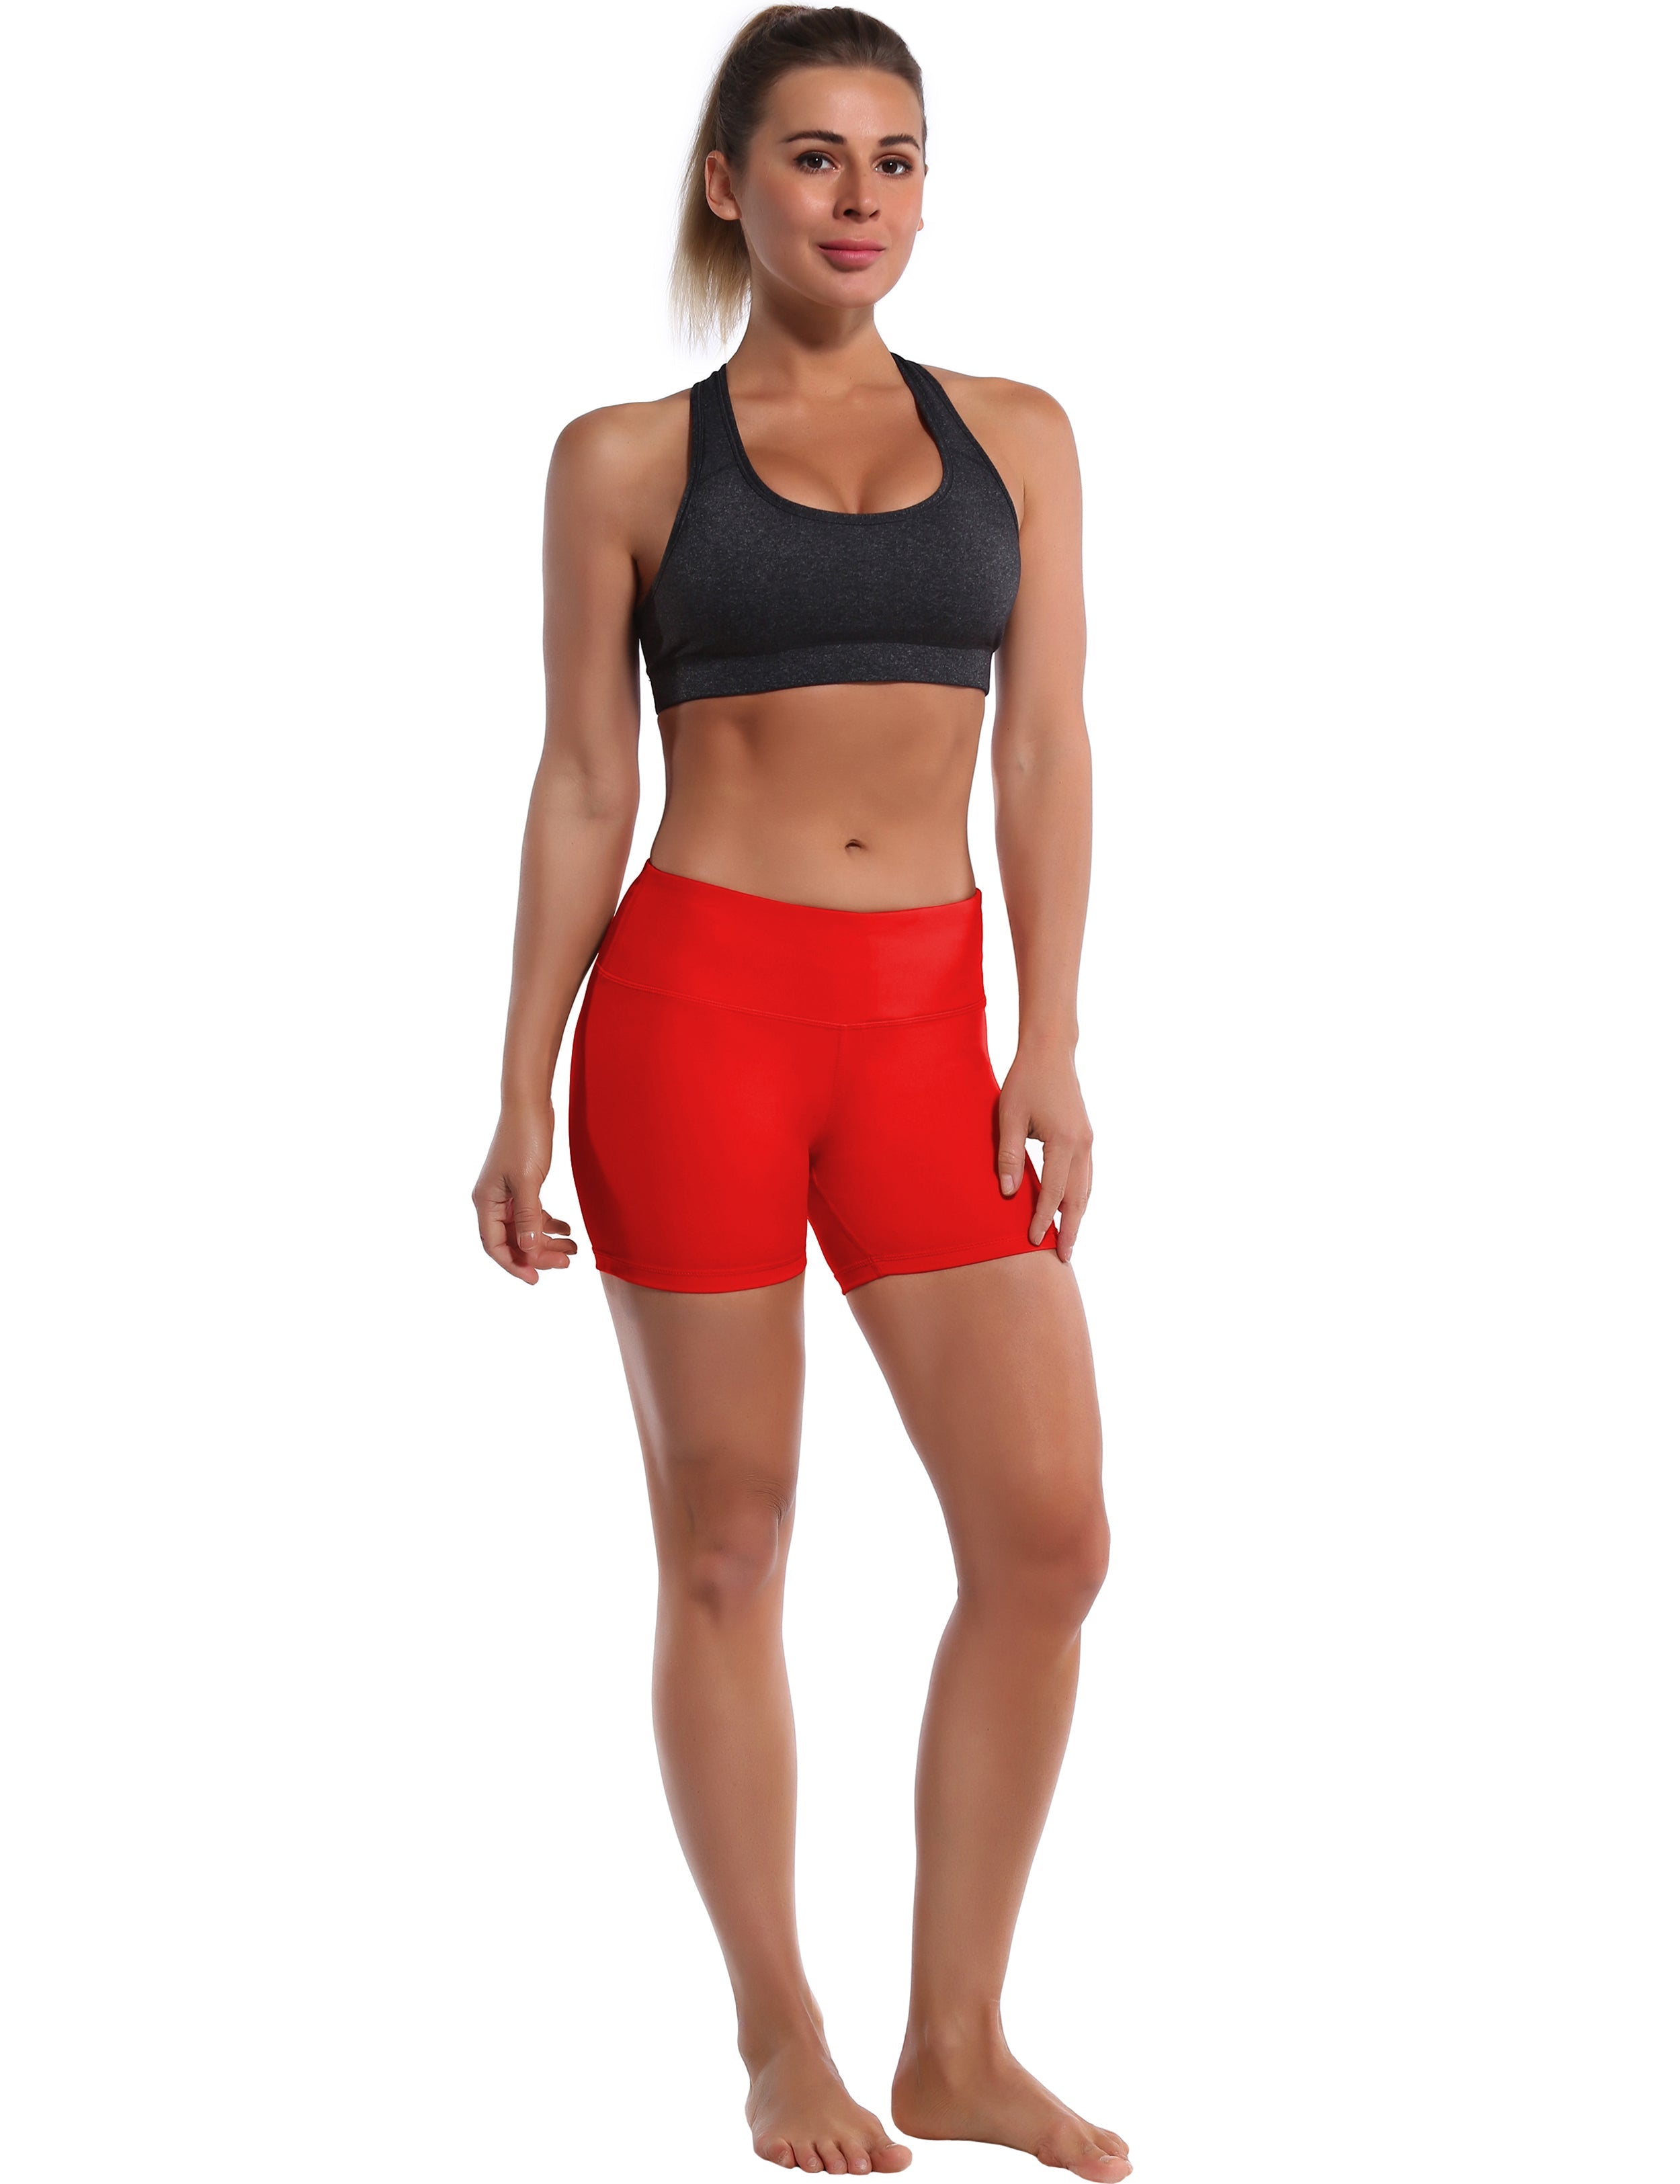 4" Pilates Shorts scarlet Sleek, soft, smooth and totally comfortable: our newest style is here. Softest-ever fabric High elasticity High density 4-way stretch Fabric doesn't attract lint easily No see-through Moisture-wicking Machine wash 75% Nylon, 25% Spandex